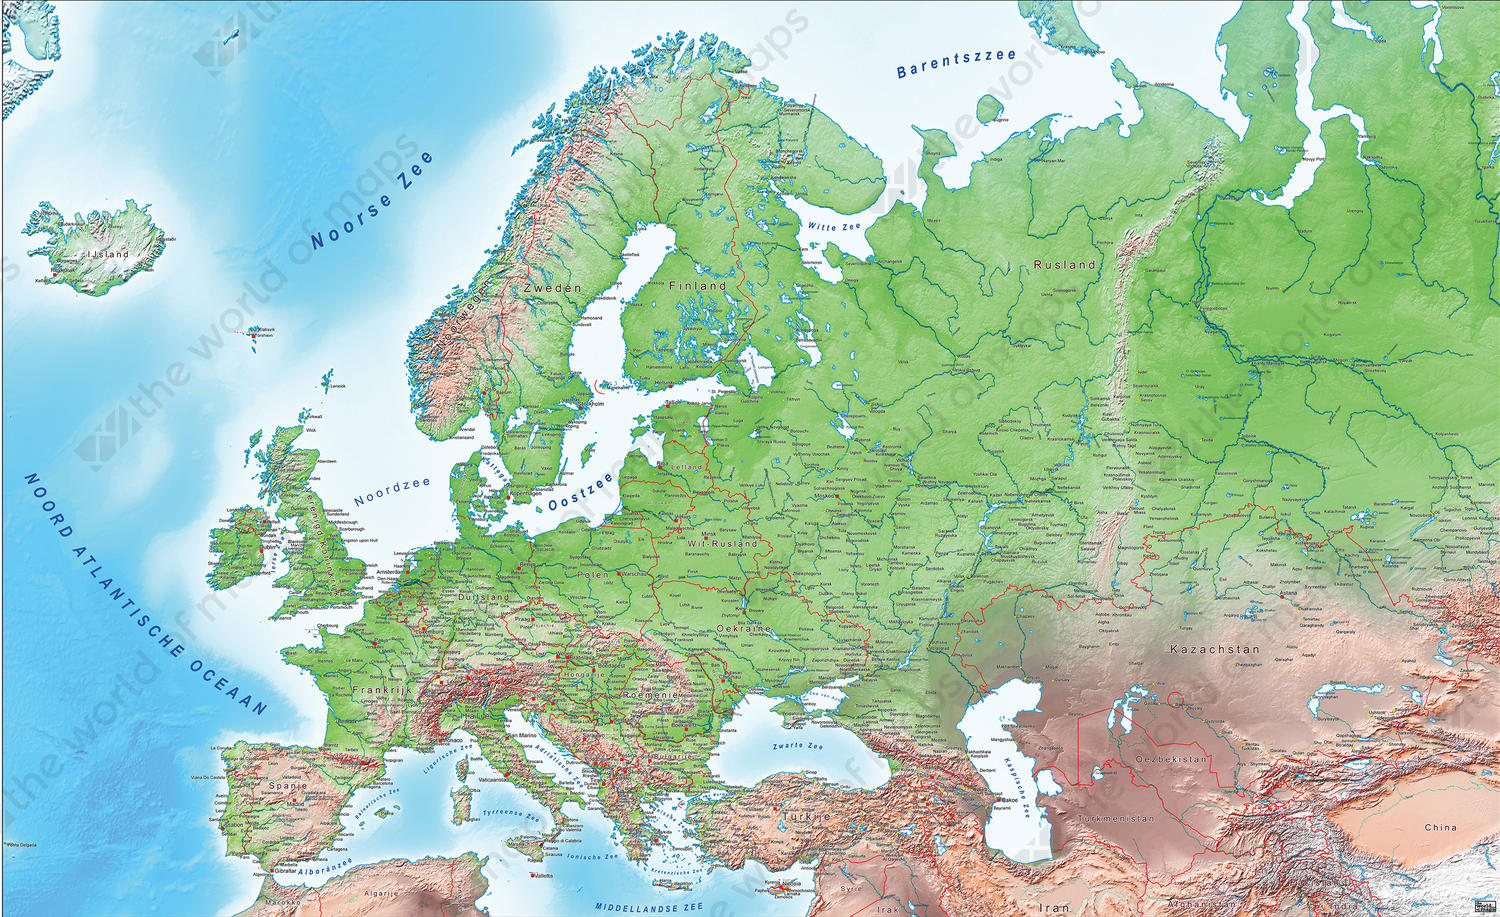 europe physical map with labels